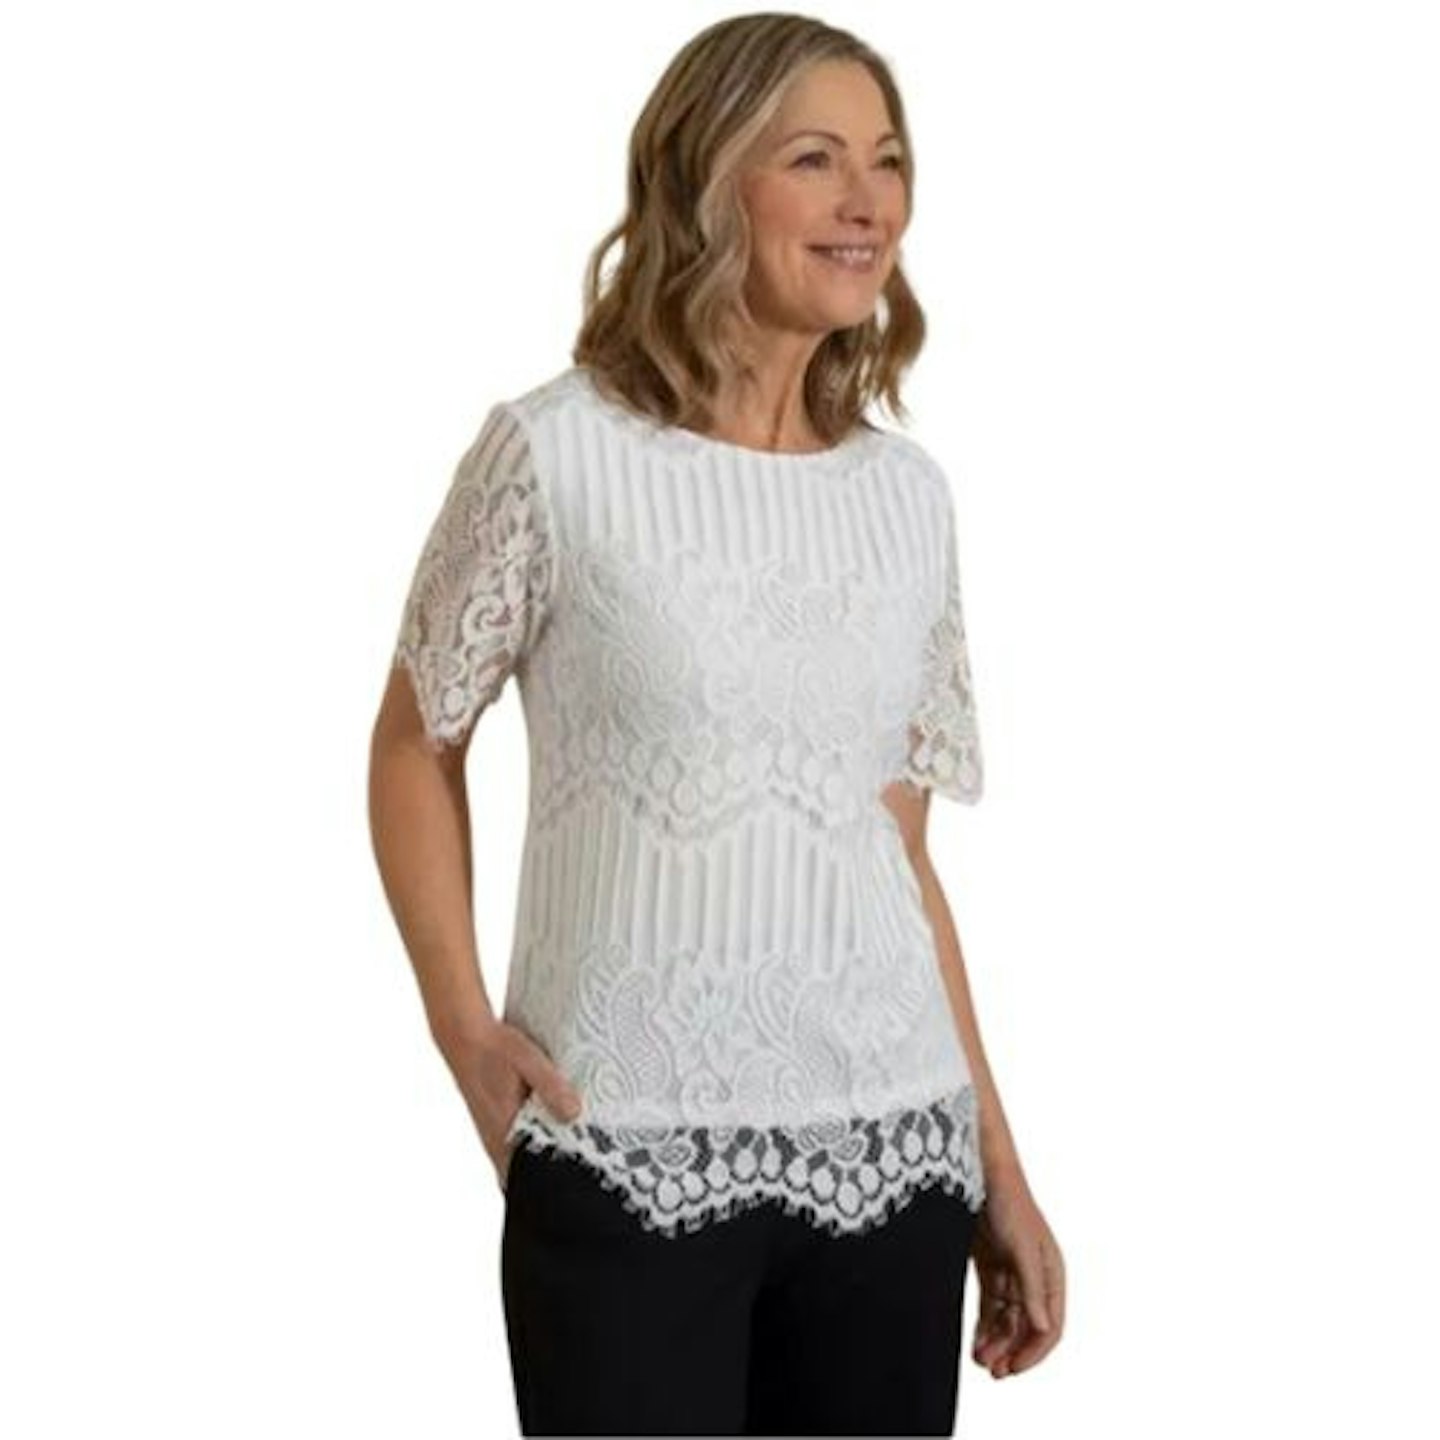 Anna Rose Crochet Lace Top in Black